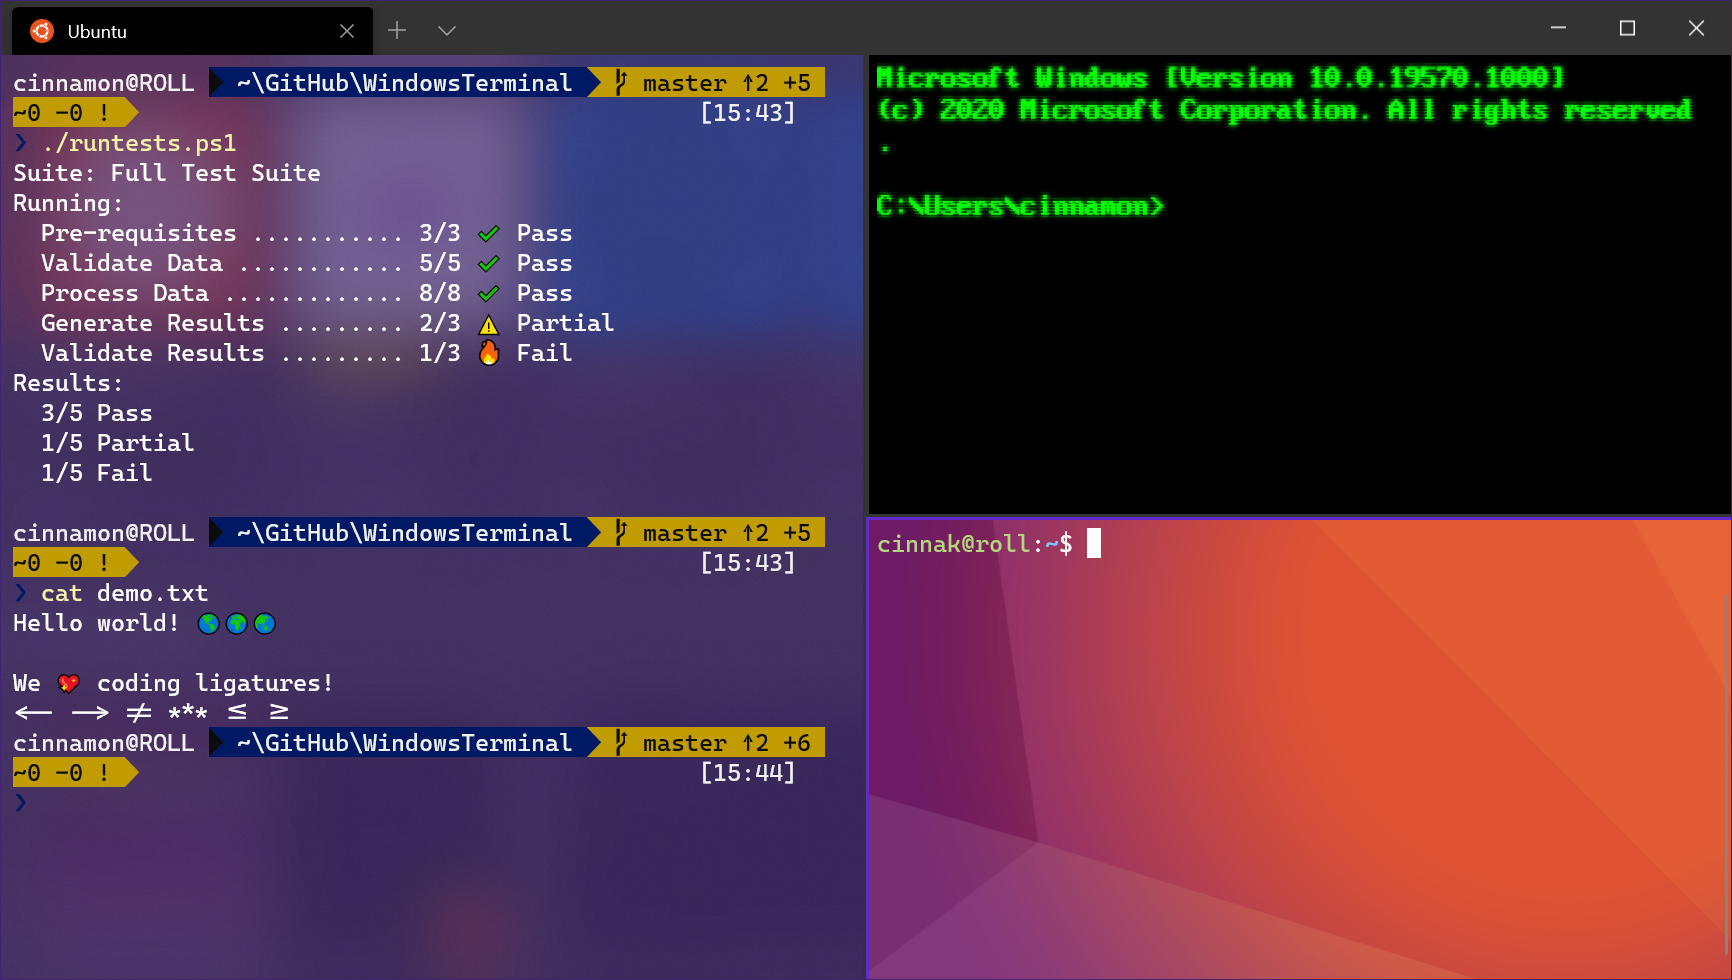 New Windows Terminal v1.0.1401.0 released for Windows 10 panes.png